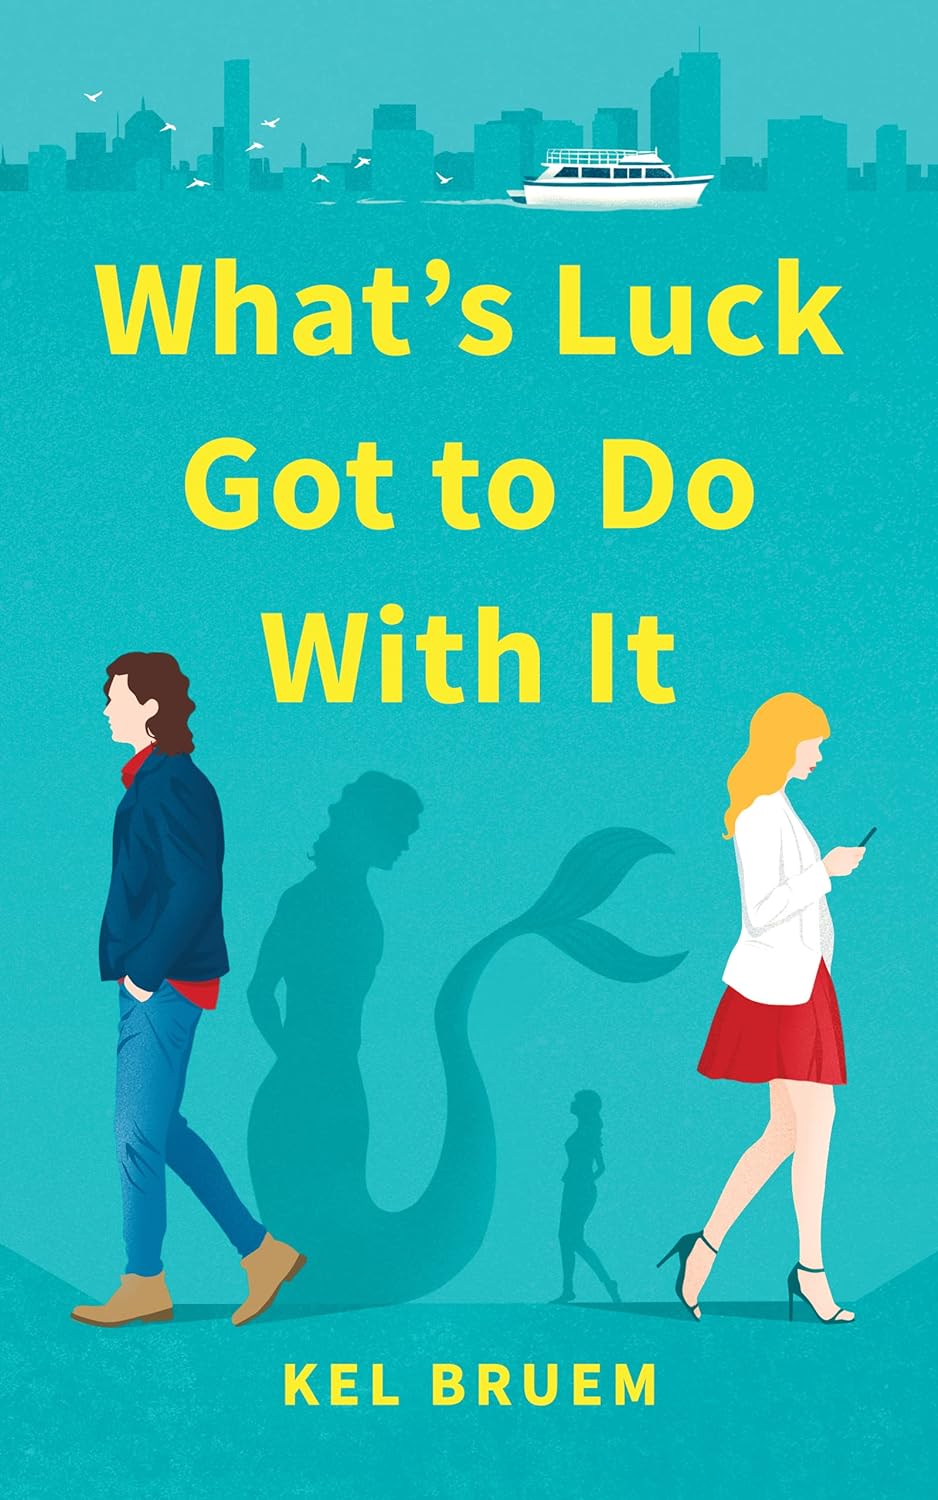 What’s Luck Got to Do With It by Kel Bruem